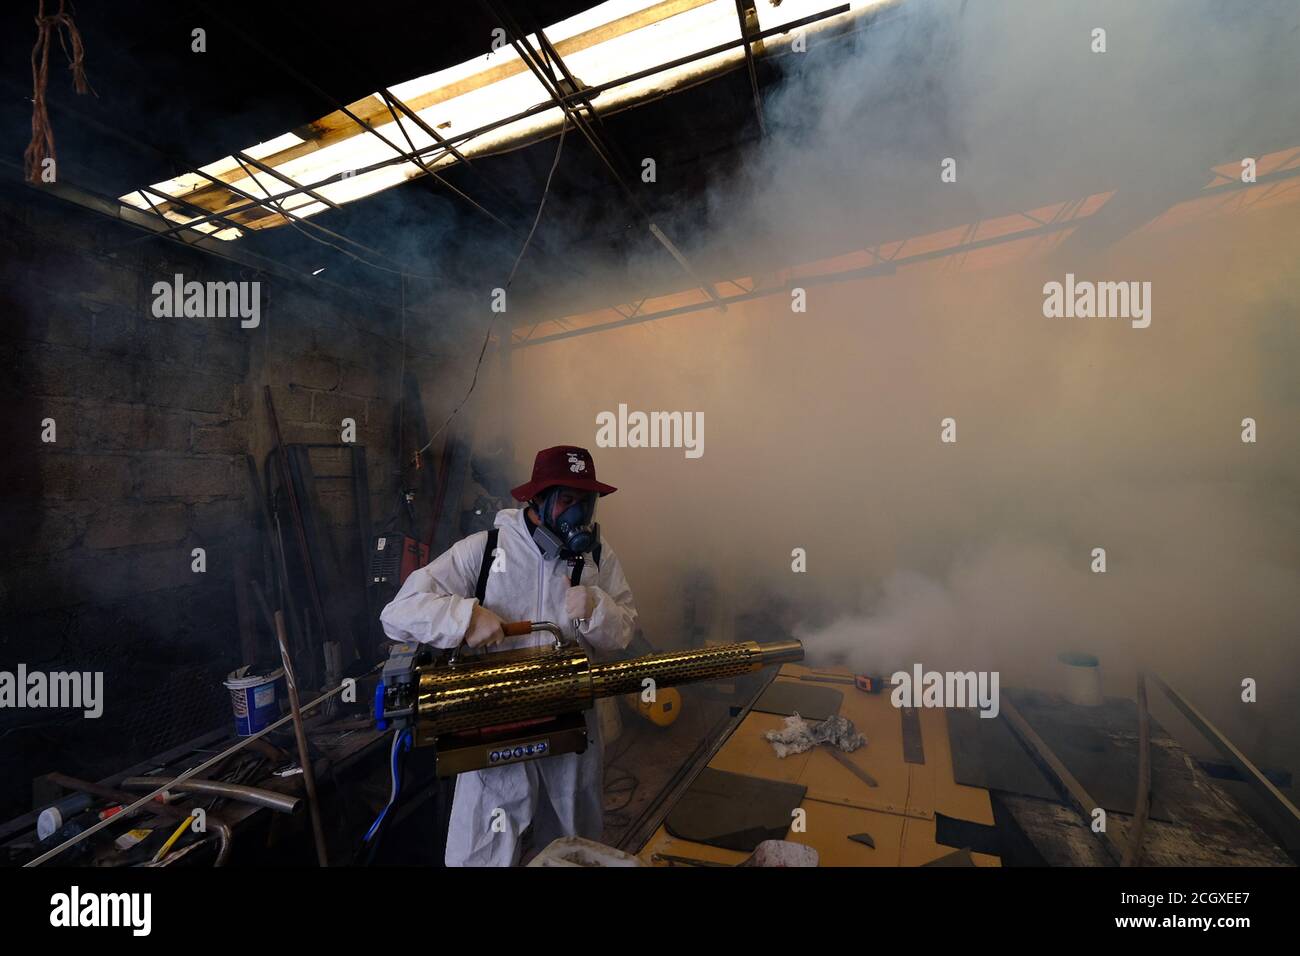 Mexico City, Mexico. 11th Sep, 2020. A worker sanitizes a neighborhood amid the COVID-19 pandemic in Mexico City, Mexico, Sept. 11, 2020. The total number of the COVID-19 confirmed cases in Mexico reached 658,299, according to Mexico's Health Ministry. Credit: Israel Rosas/Xinhua/Alamy Live News Stock Photo